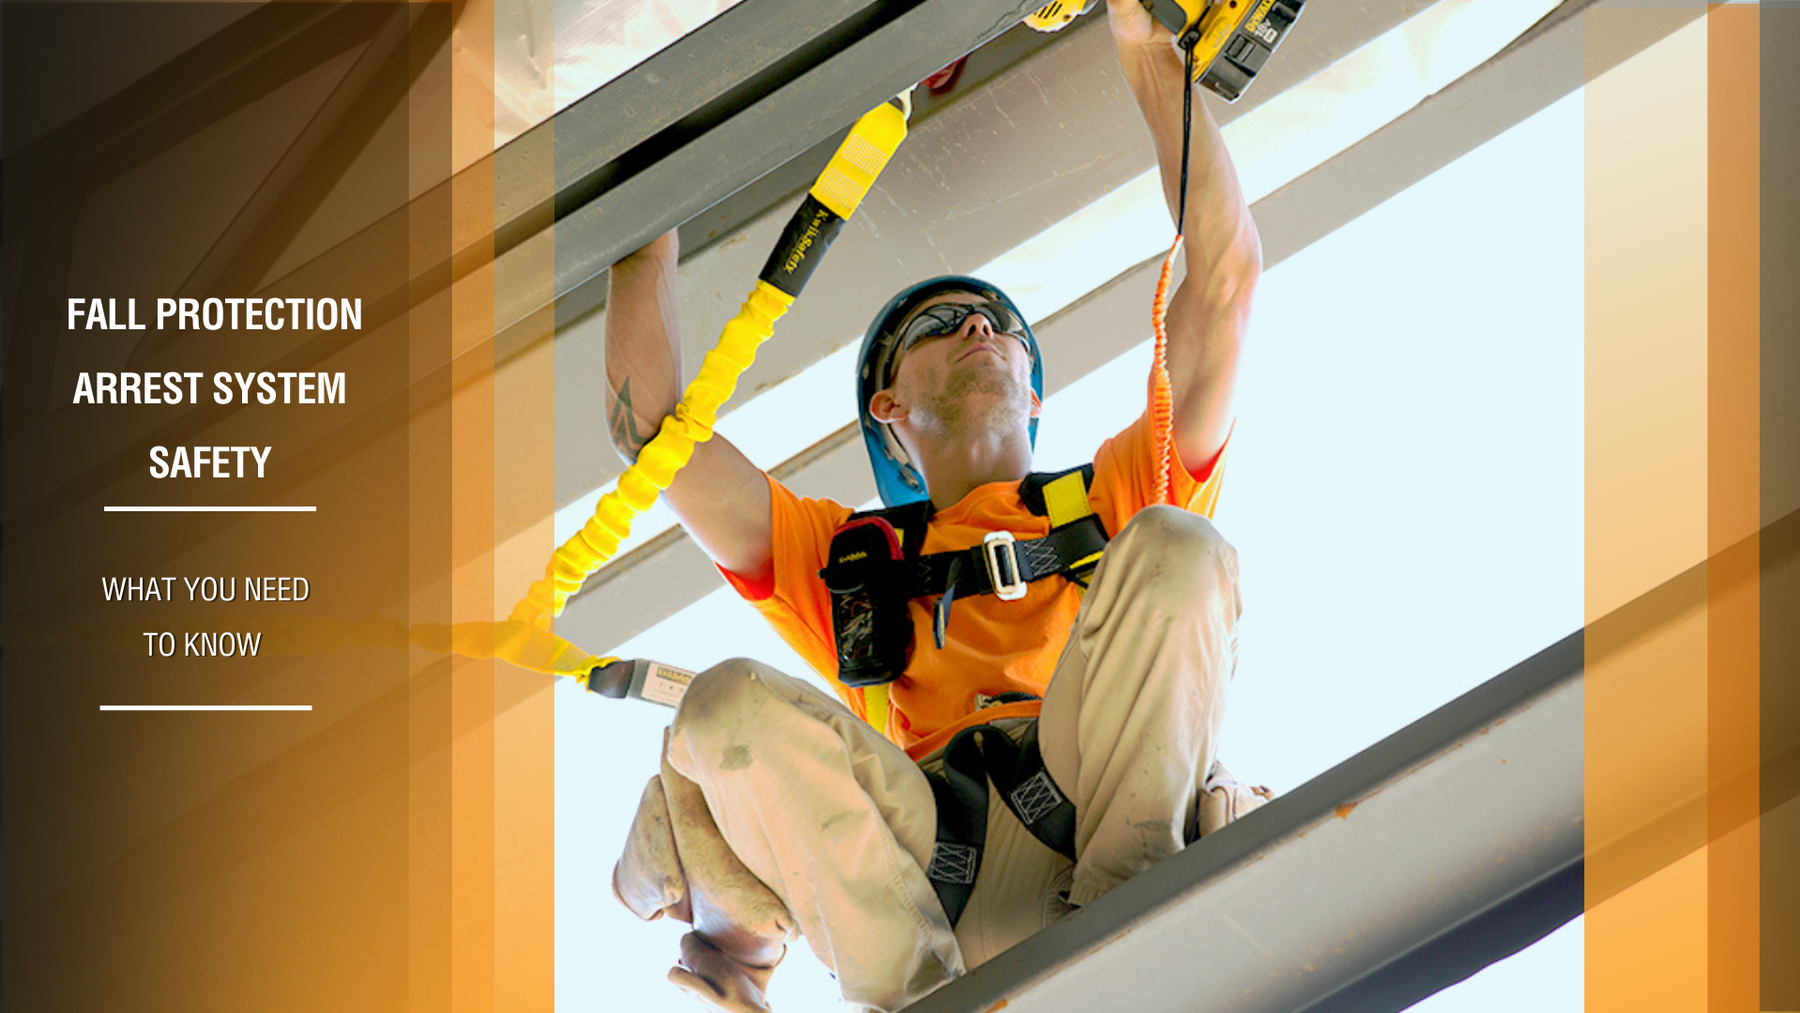 What You Need To Know About a Fall Protection Arrest System Safety